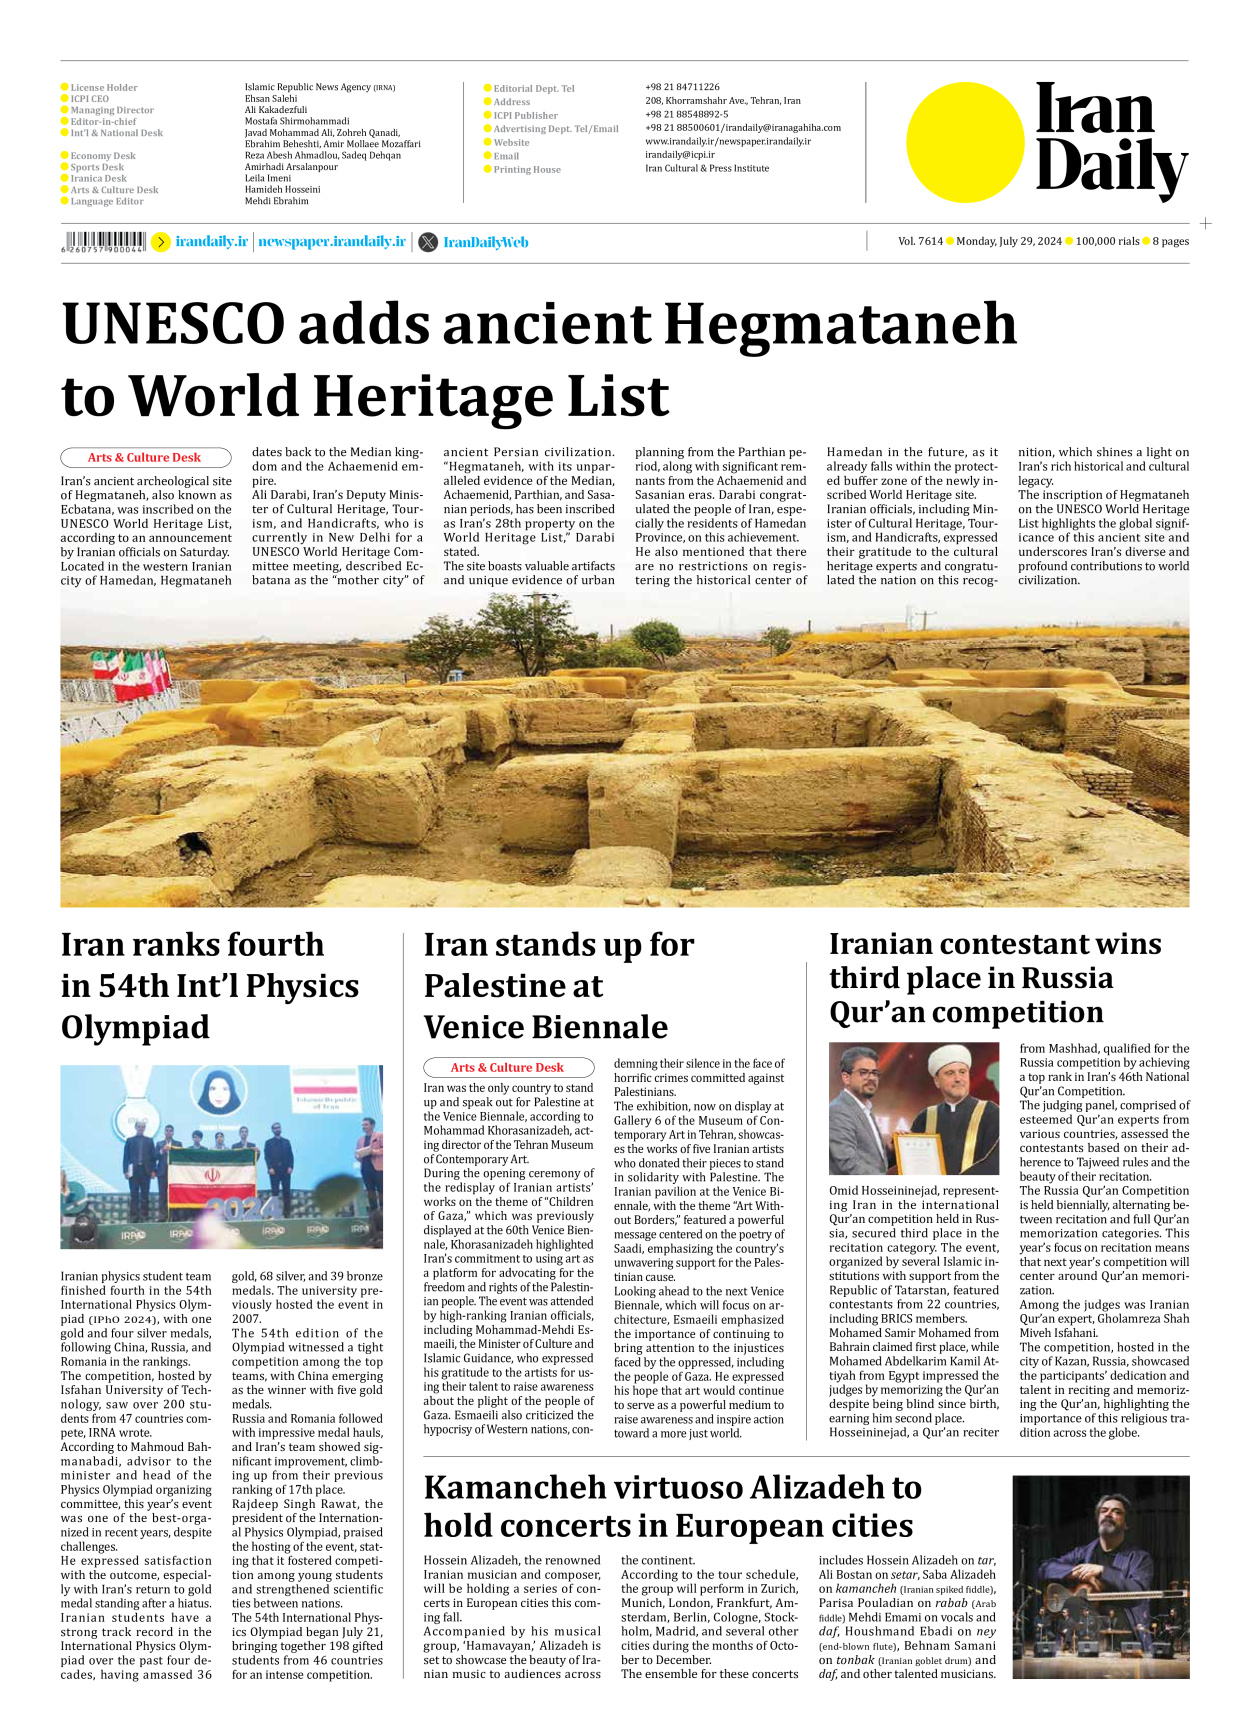 Iran Daily - Number Seven Thousand Six Hundred and Fourteen - 29 July 2024 - Page 8